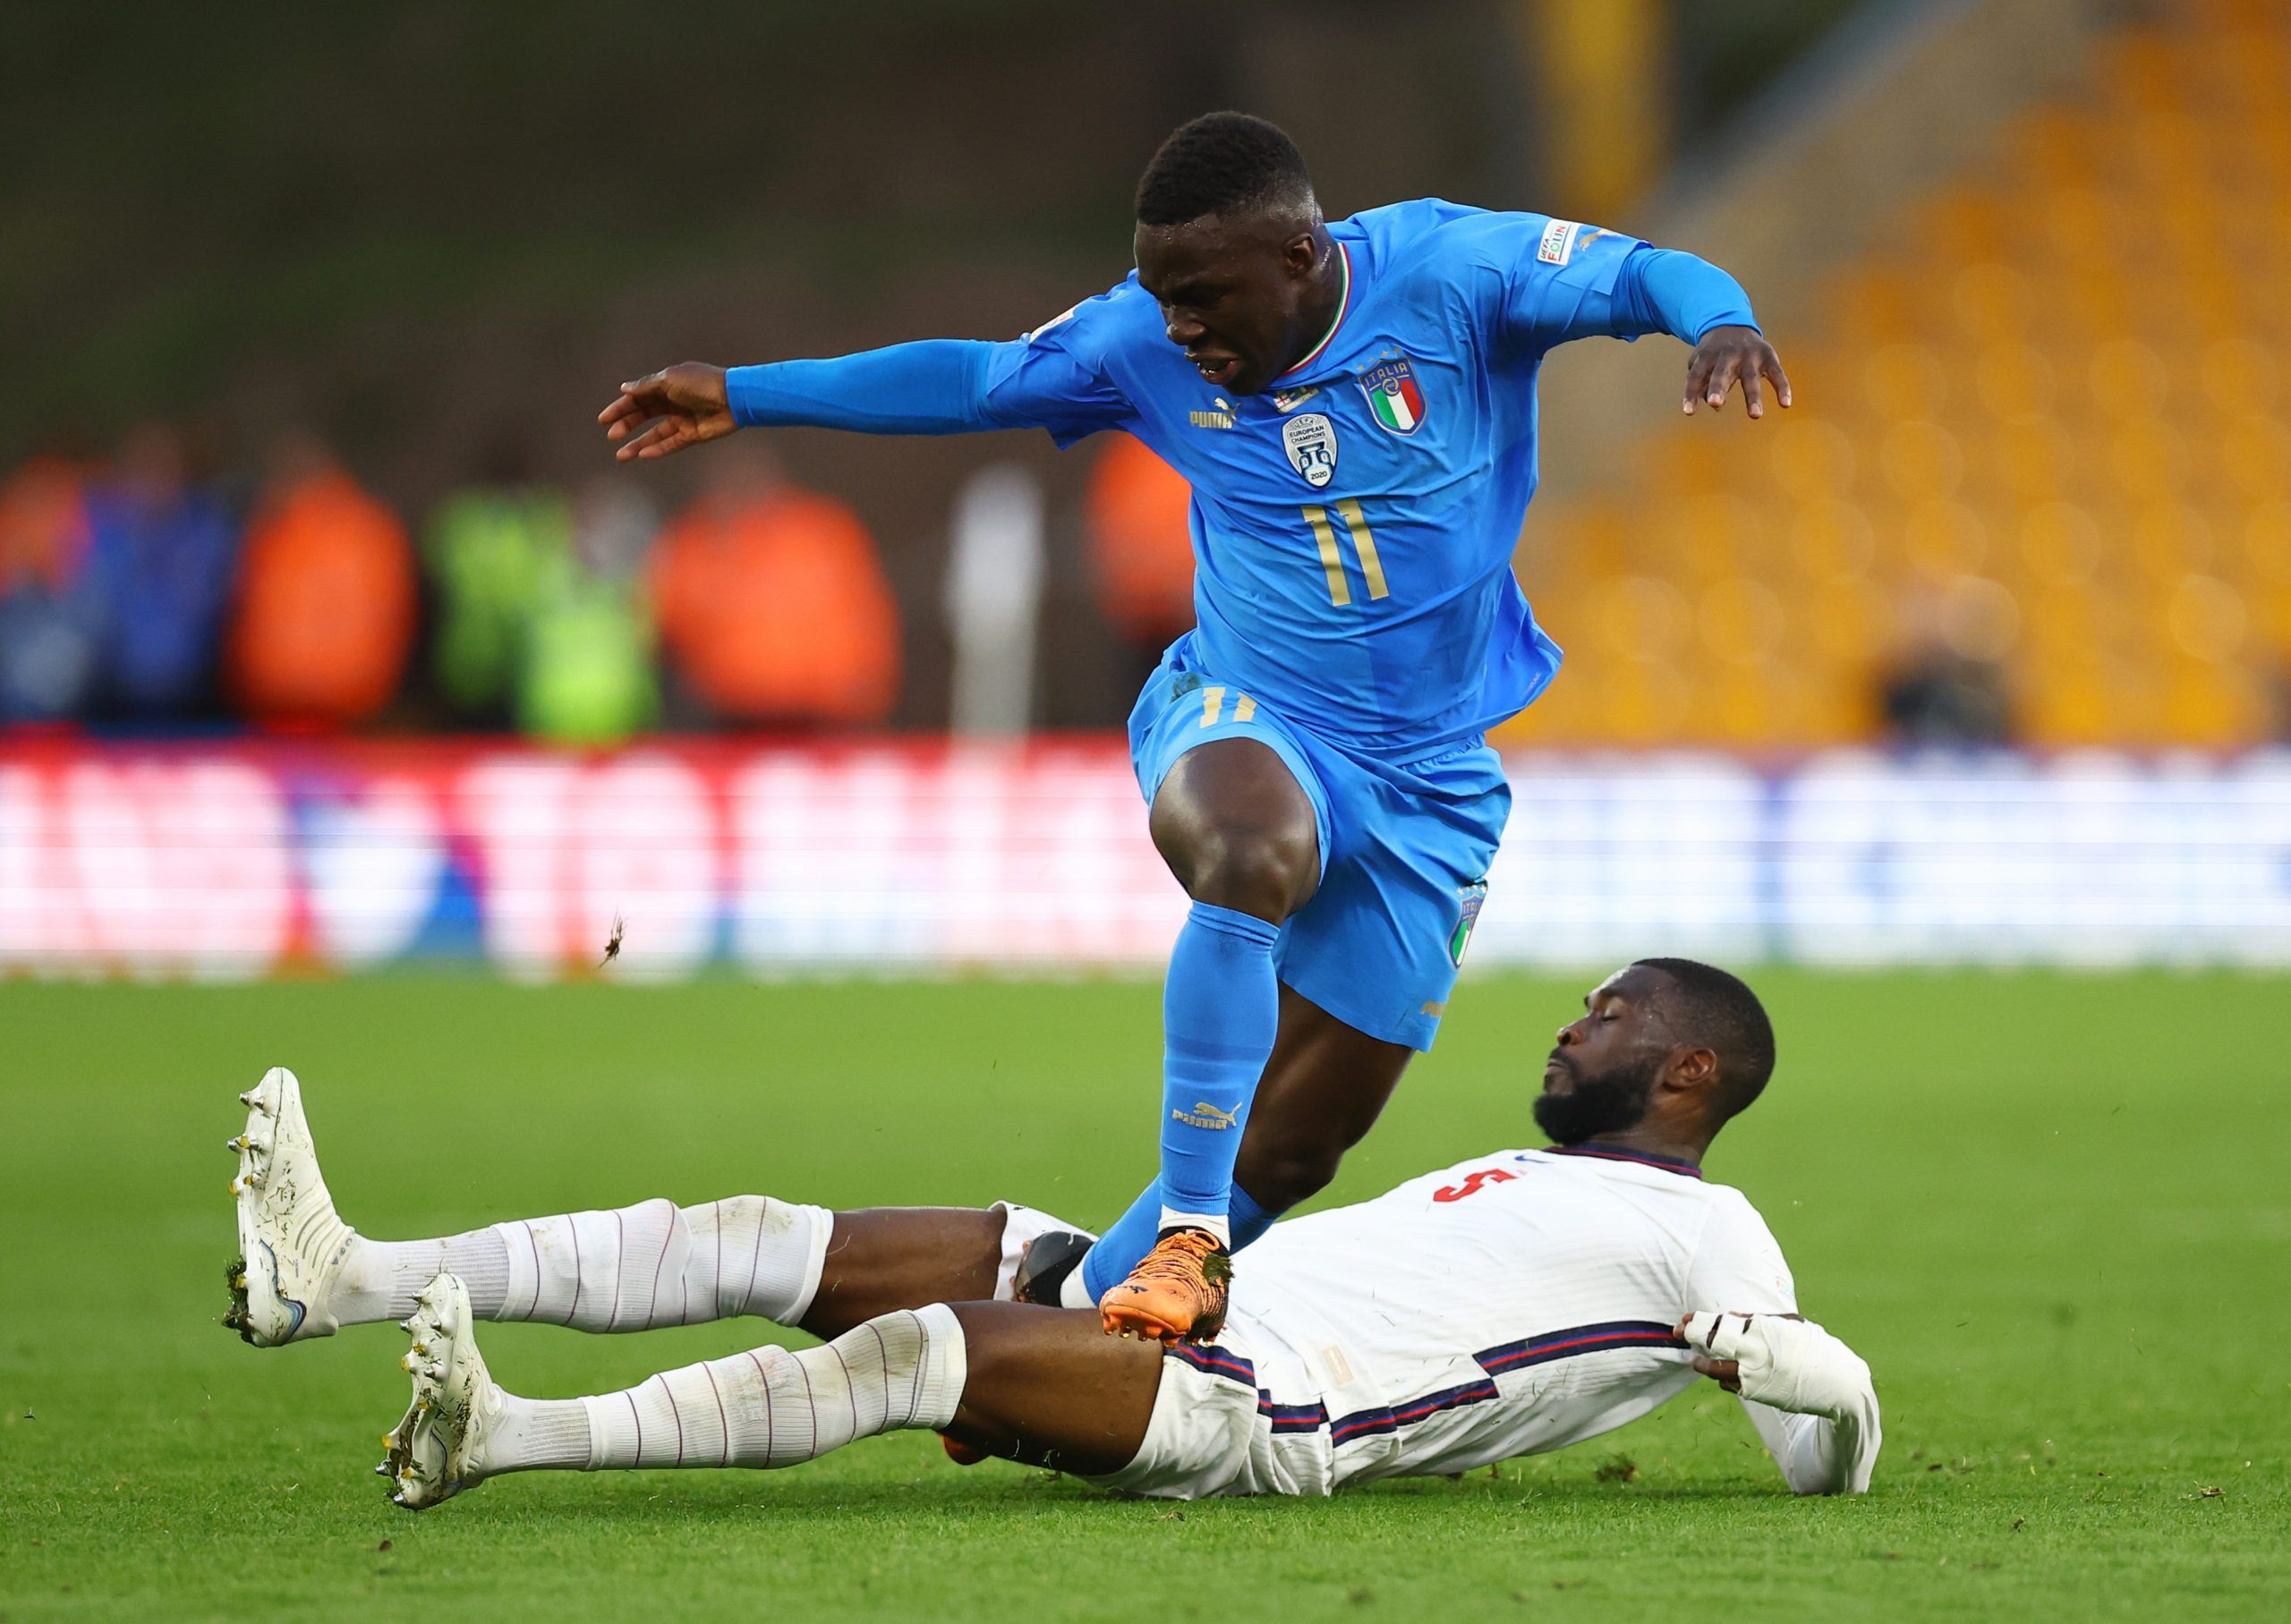 Soccer Football - UEFA Nations League - Group C - England v Italy - Molineux Stadium, Wolverhampton, Britain - June 11, 2022 Italy's Wilfried Gnonto in action with England's Fikayo Tomori REUTERS/Hannah Mckay